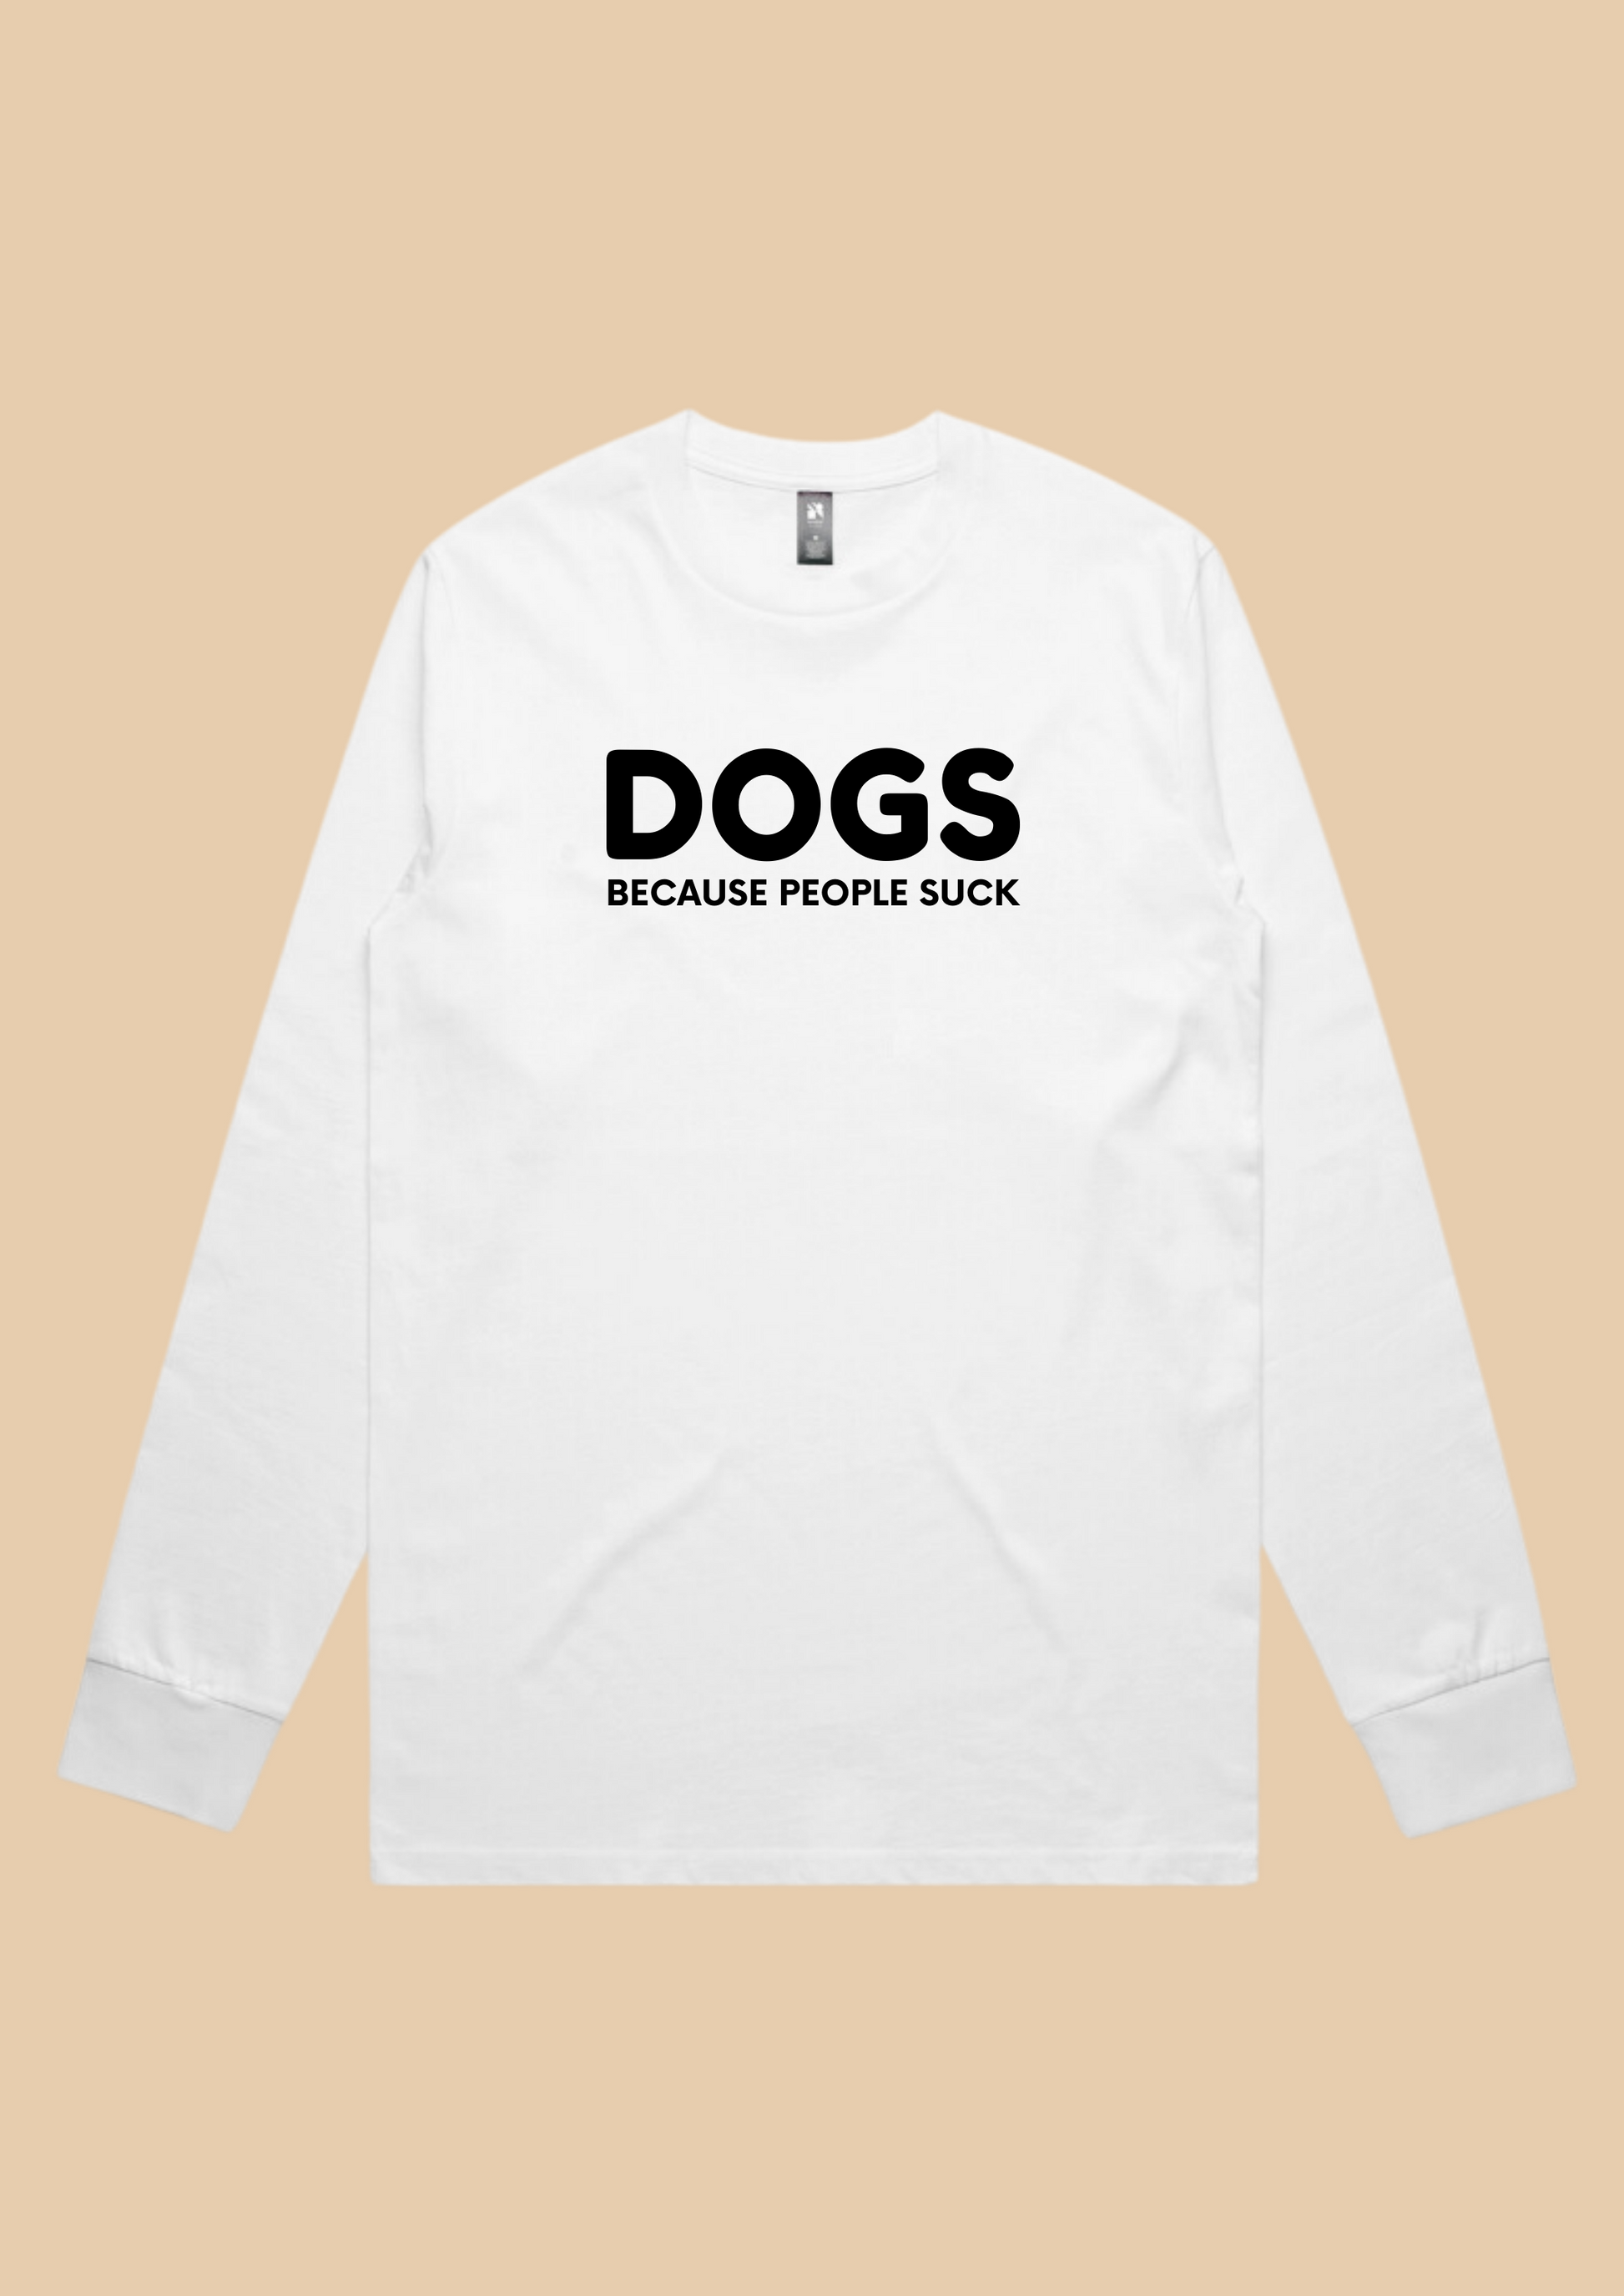 dog quote tshirt long sleeve tshirt for dog lovers dog quote long sleeve